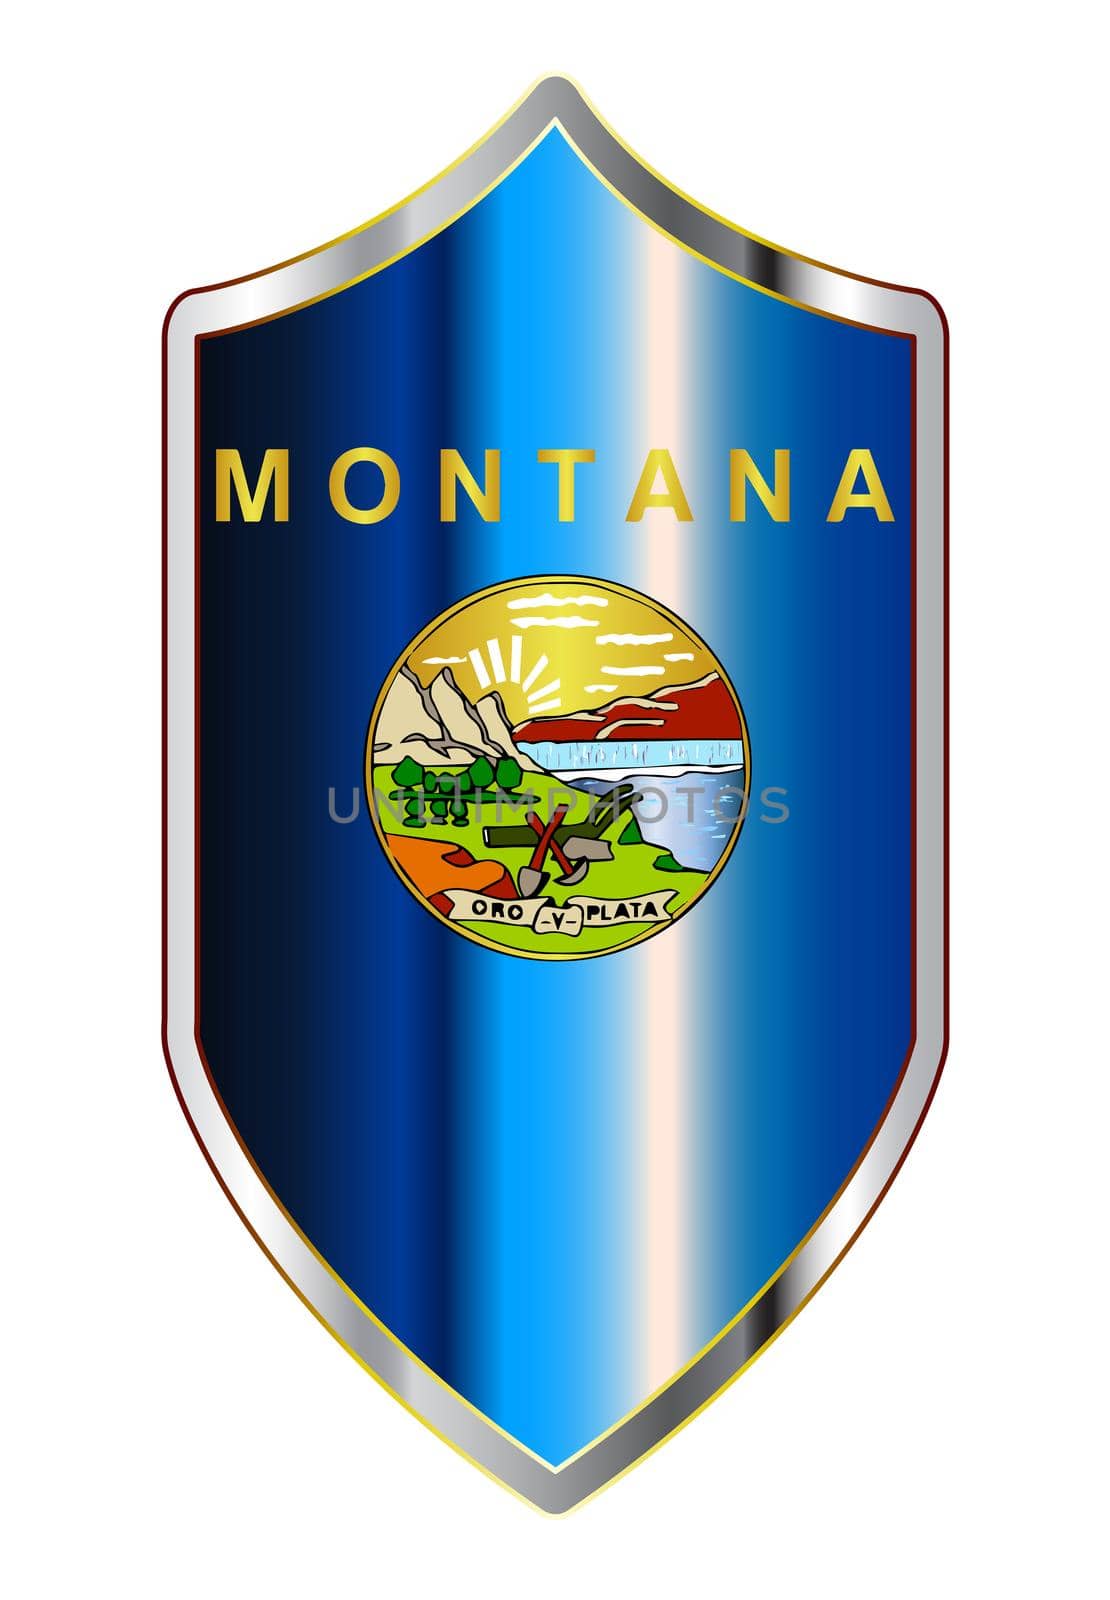 A typical crusader type shield with the state flag of Montana all isolated on a white background